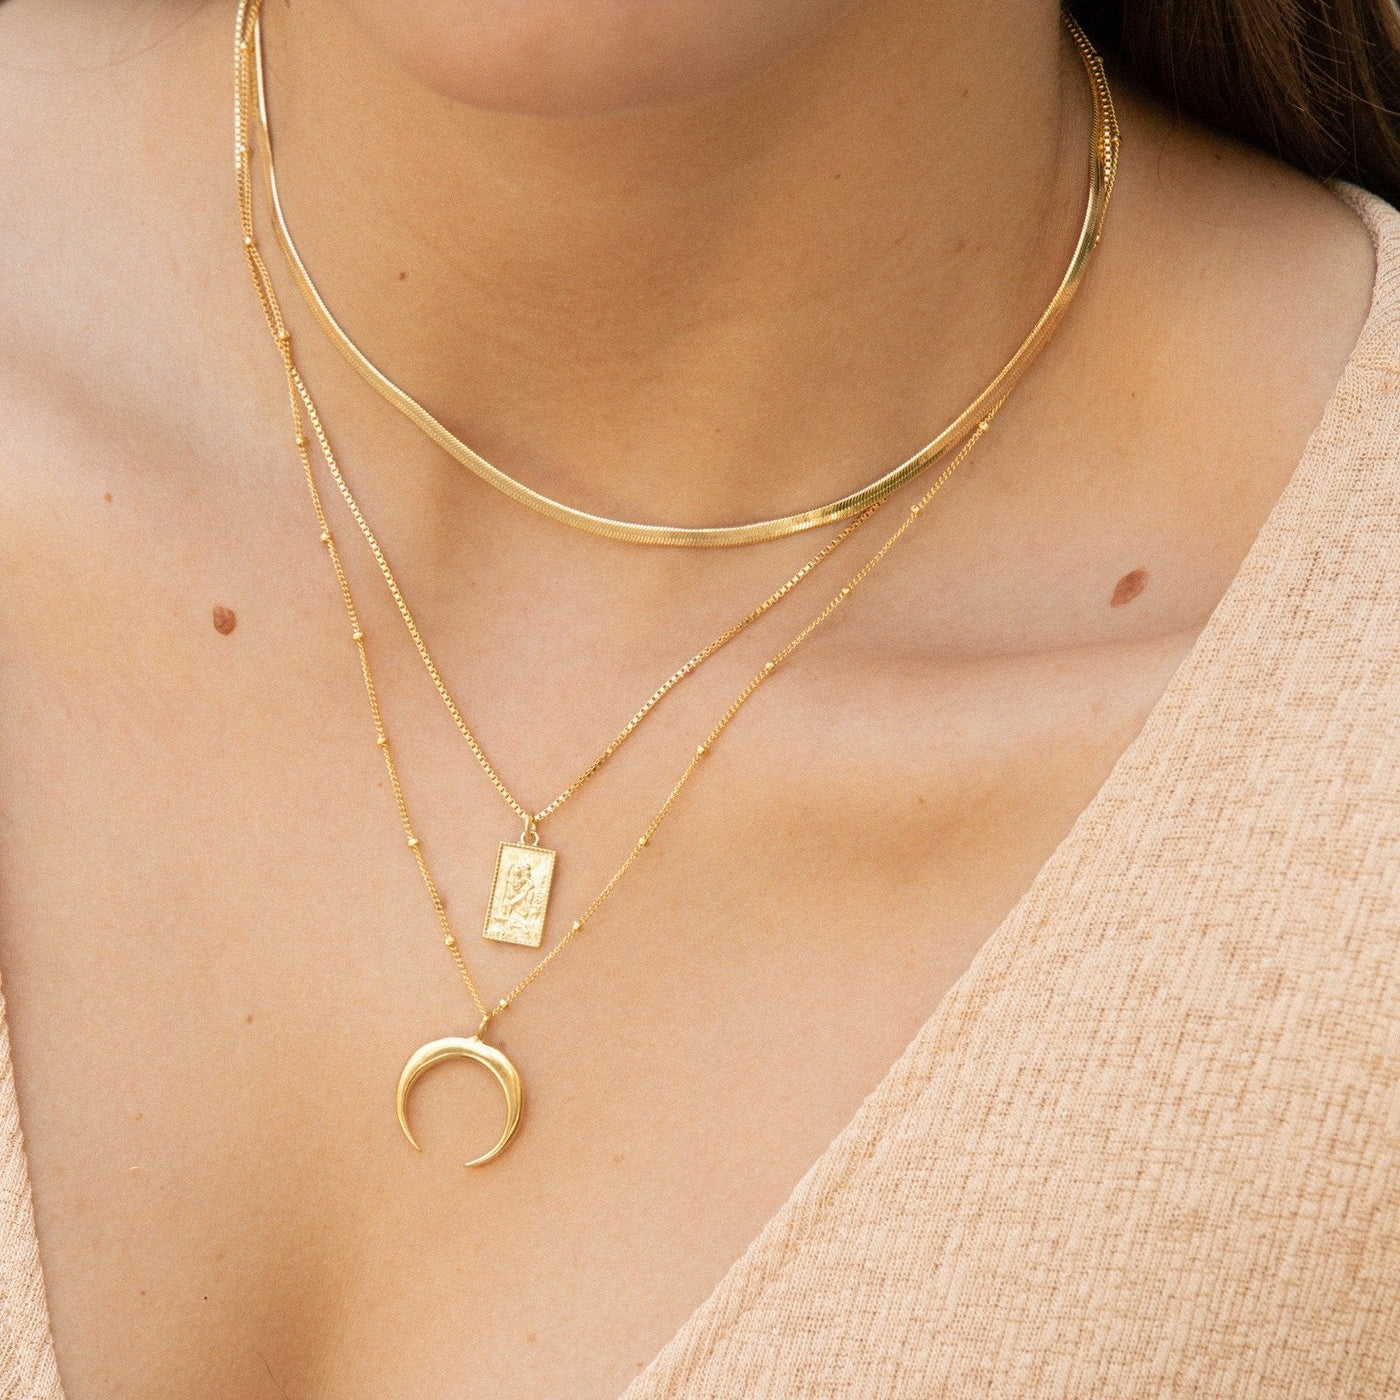 Dainty Horn Necklace by Simple & Dainty Jewelry